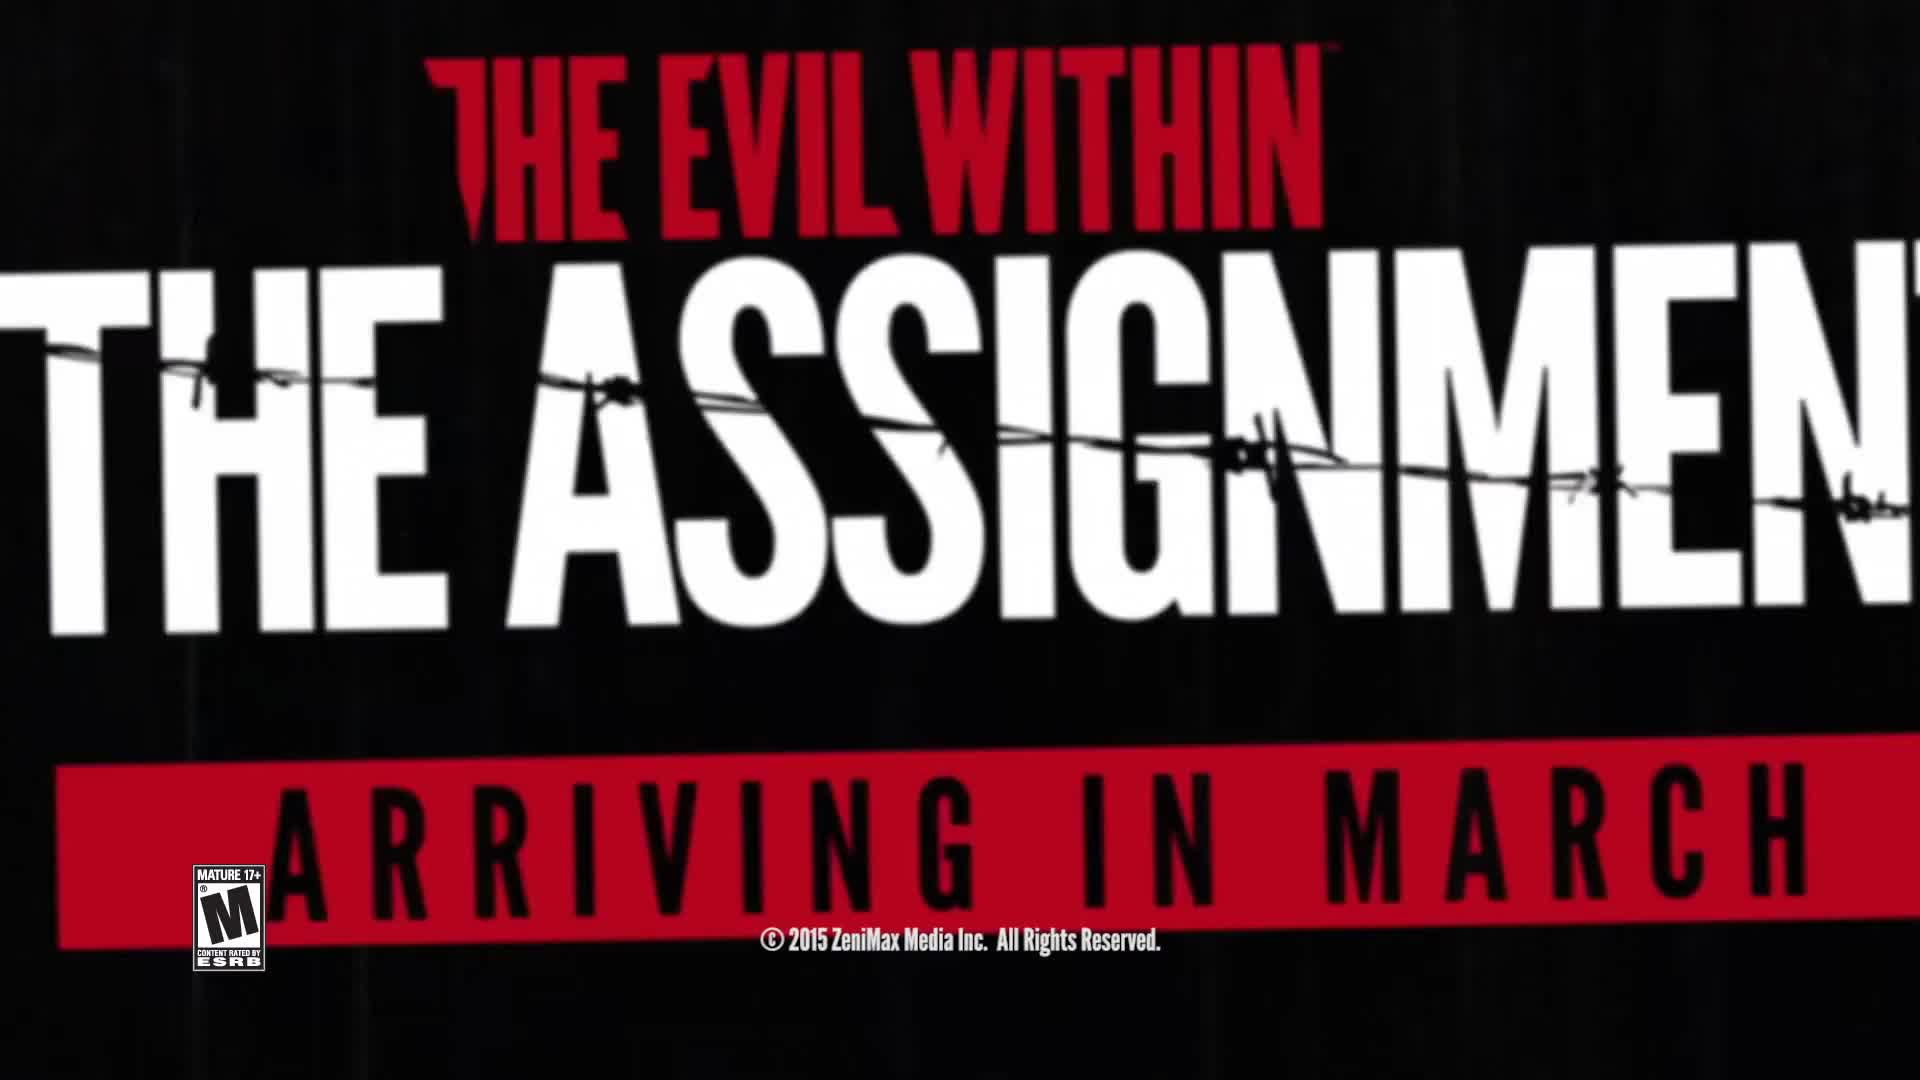 The Evil Within: The Assignment - Teaser